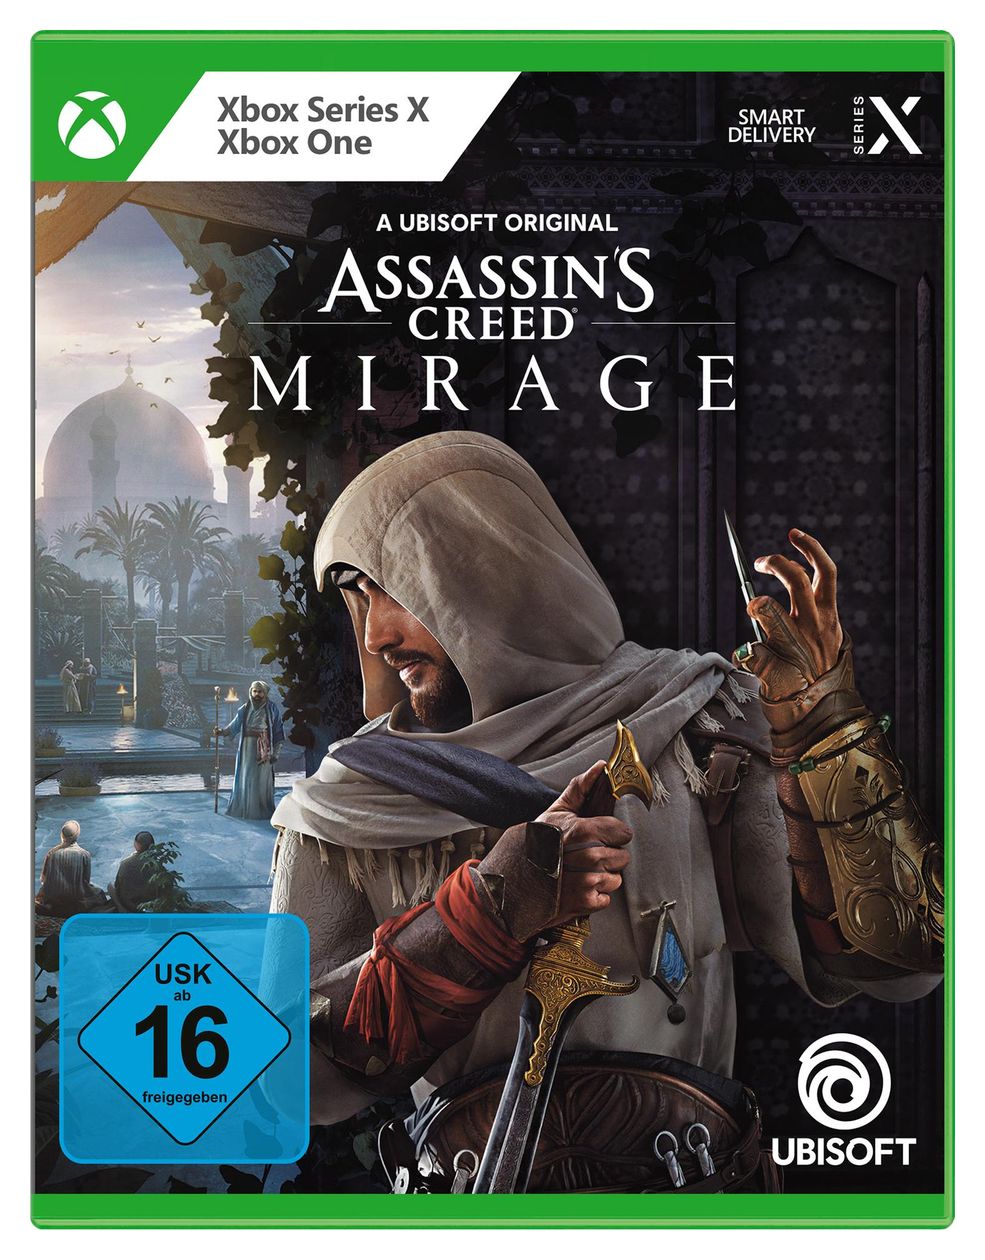 Assassin's Creed Mirage (Xbox Series X) 